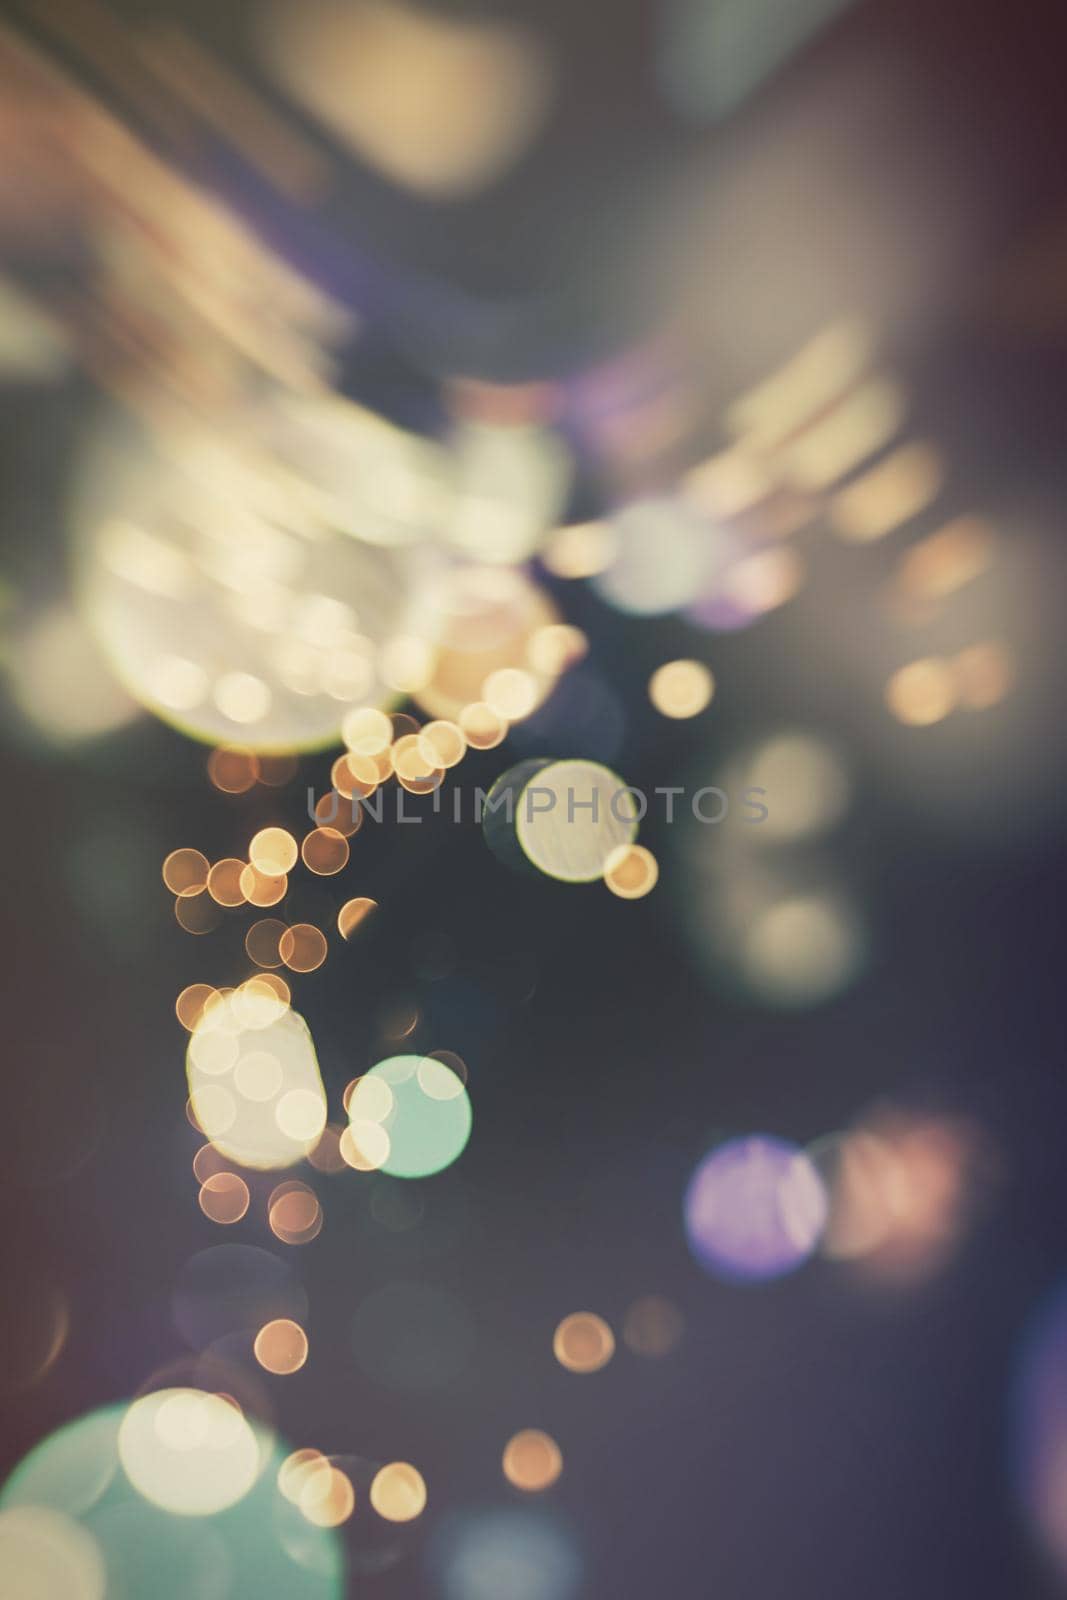 celebration background with defocused golden lights for Christmas, New Year, Holiday, party